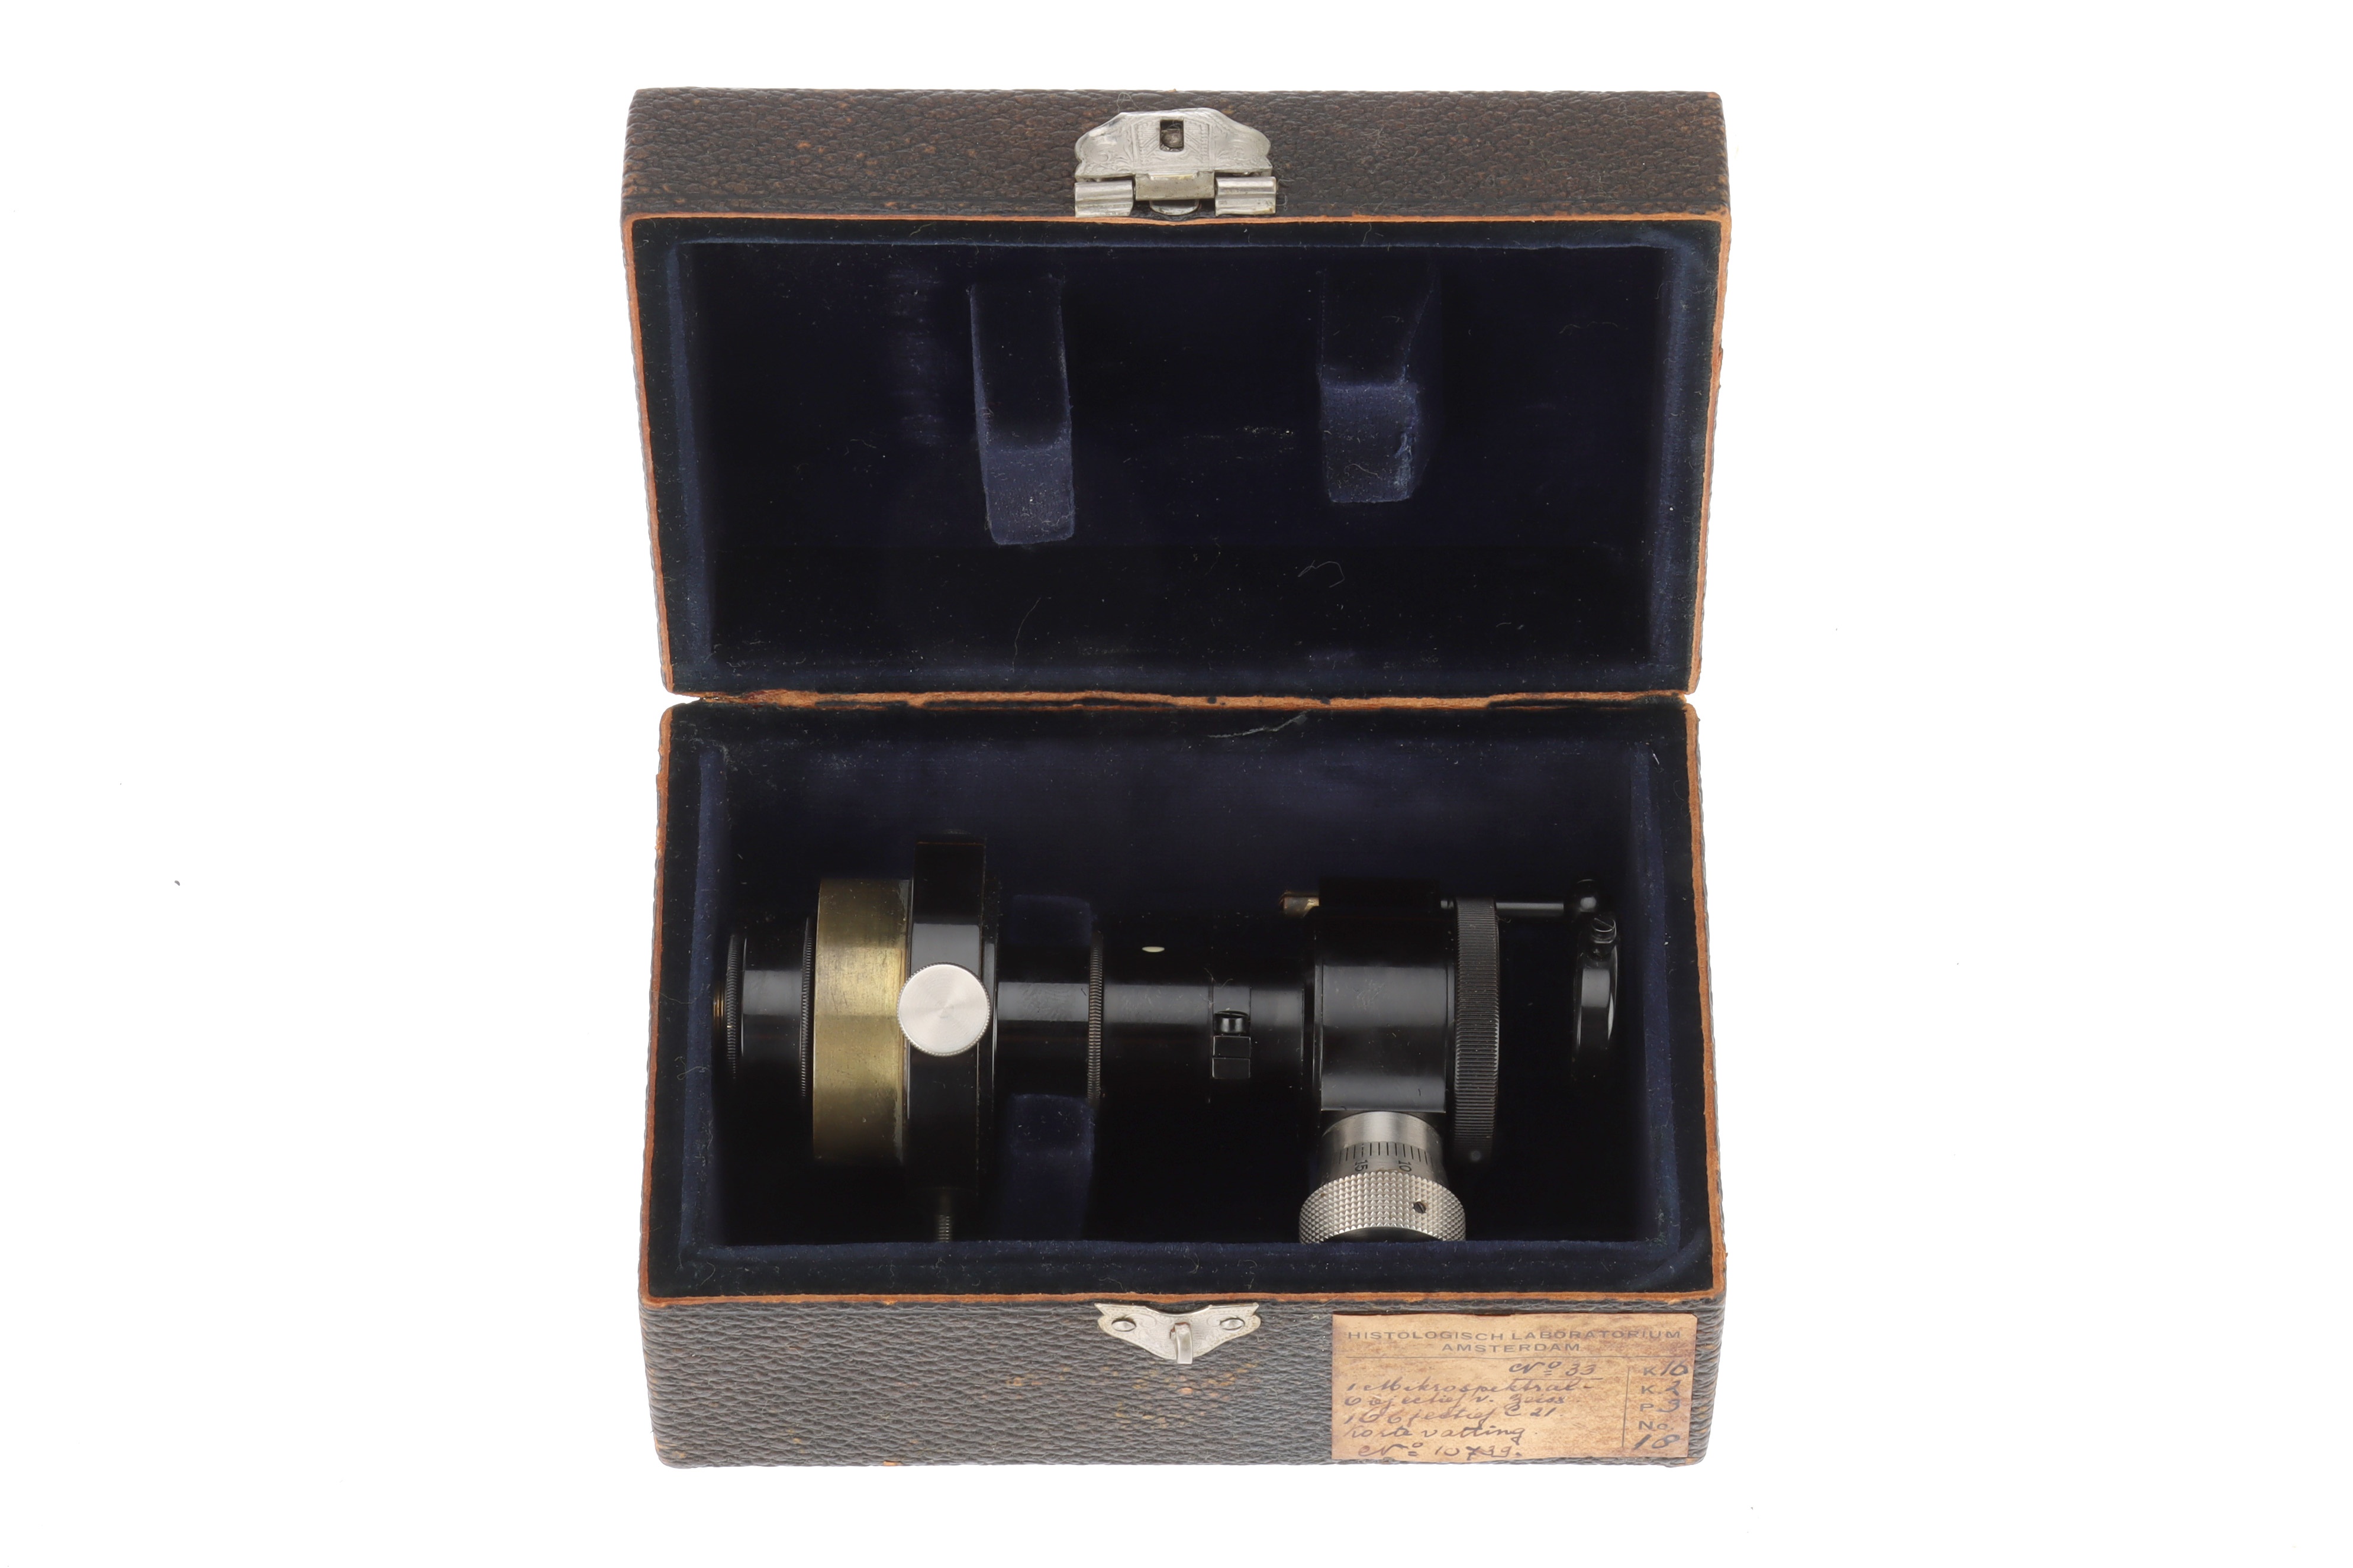 A Substage Spectroscope By Carl Zeiss Jena, - Image 2 of 2